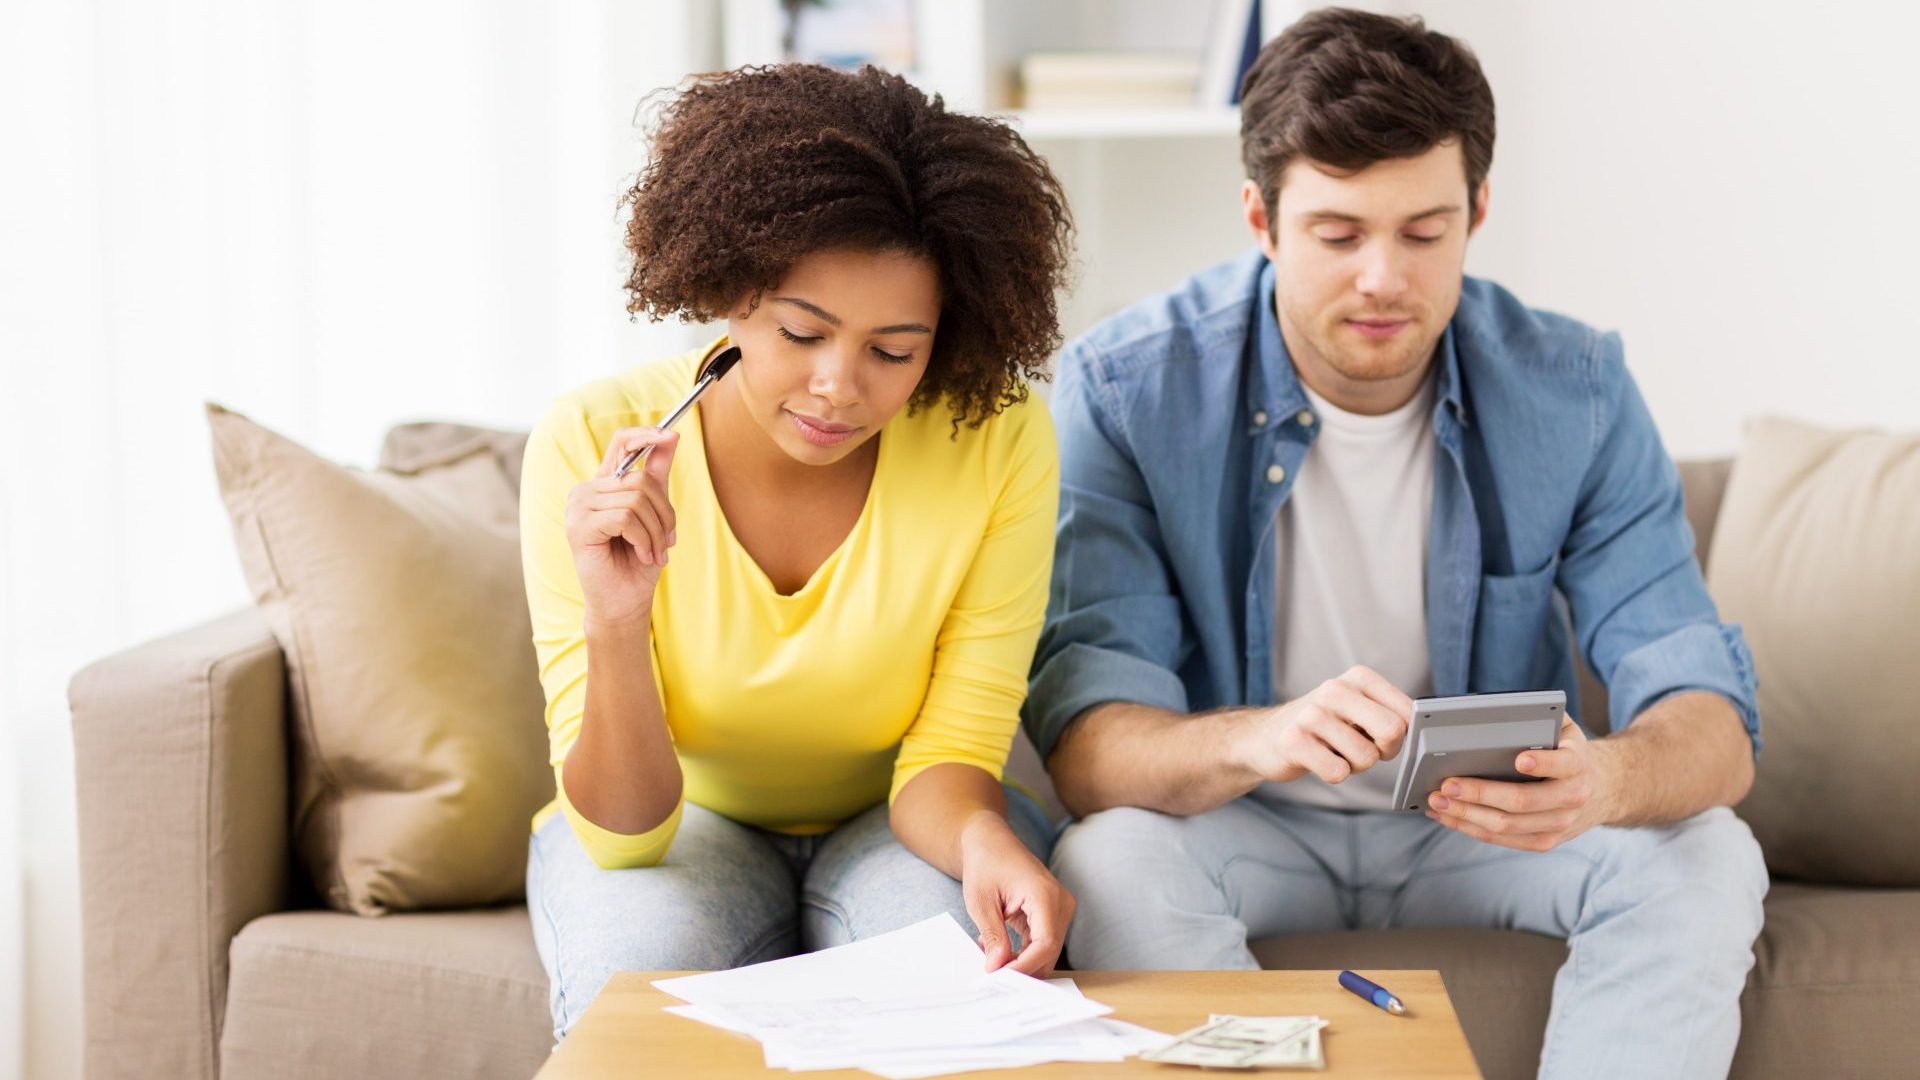 couple-with-papers-and-calculator-at-home-PAJ3JTK-min